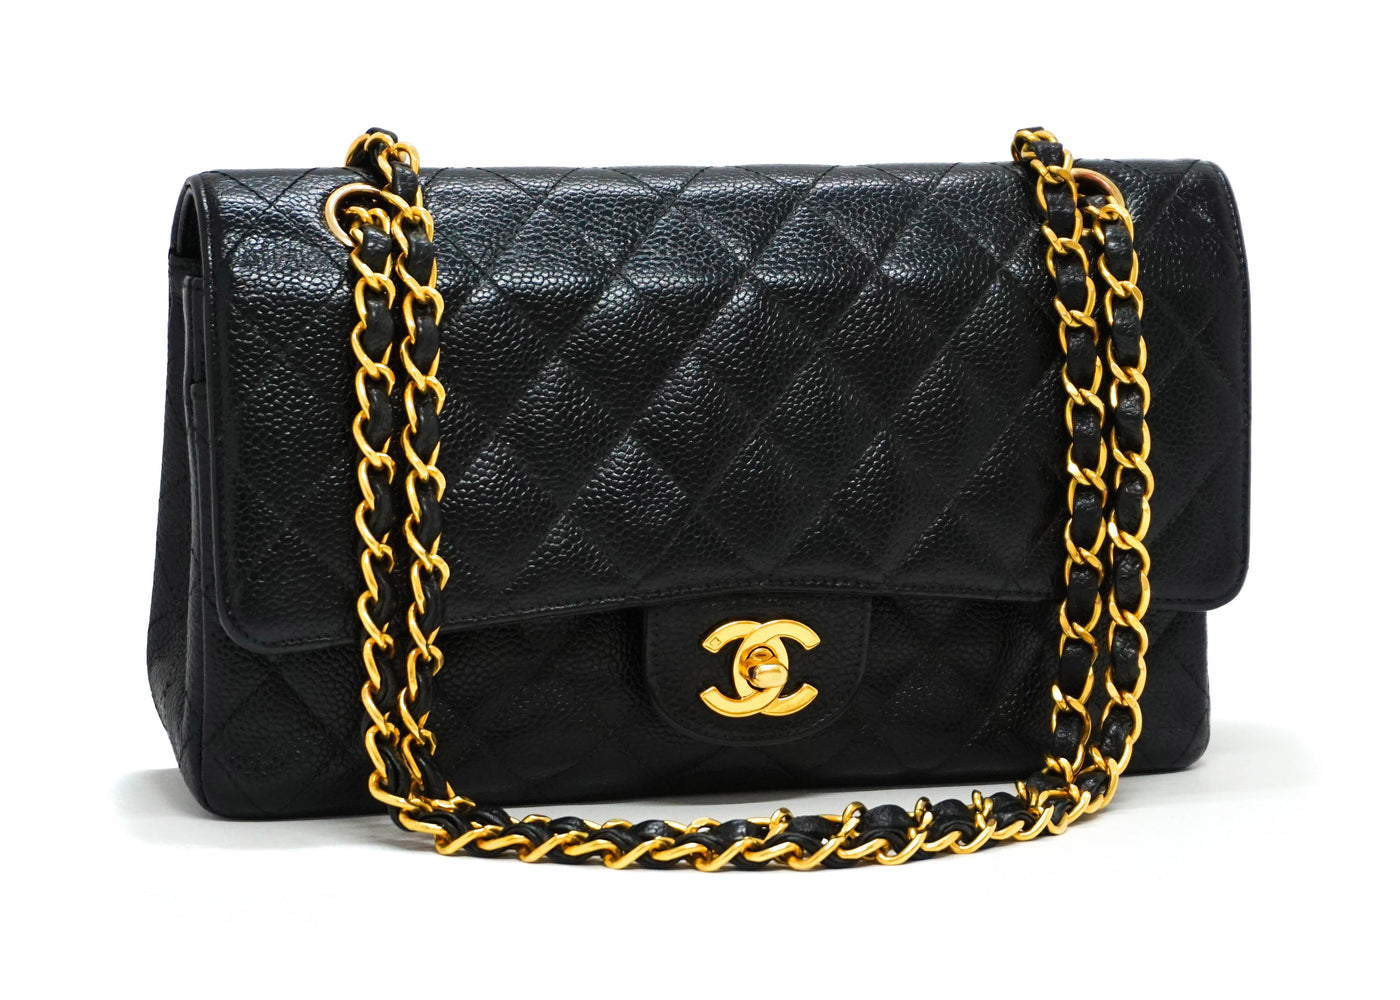 80's vintage CHANEL classic 2.55 black lambskin double chain